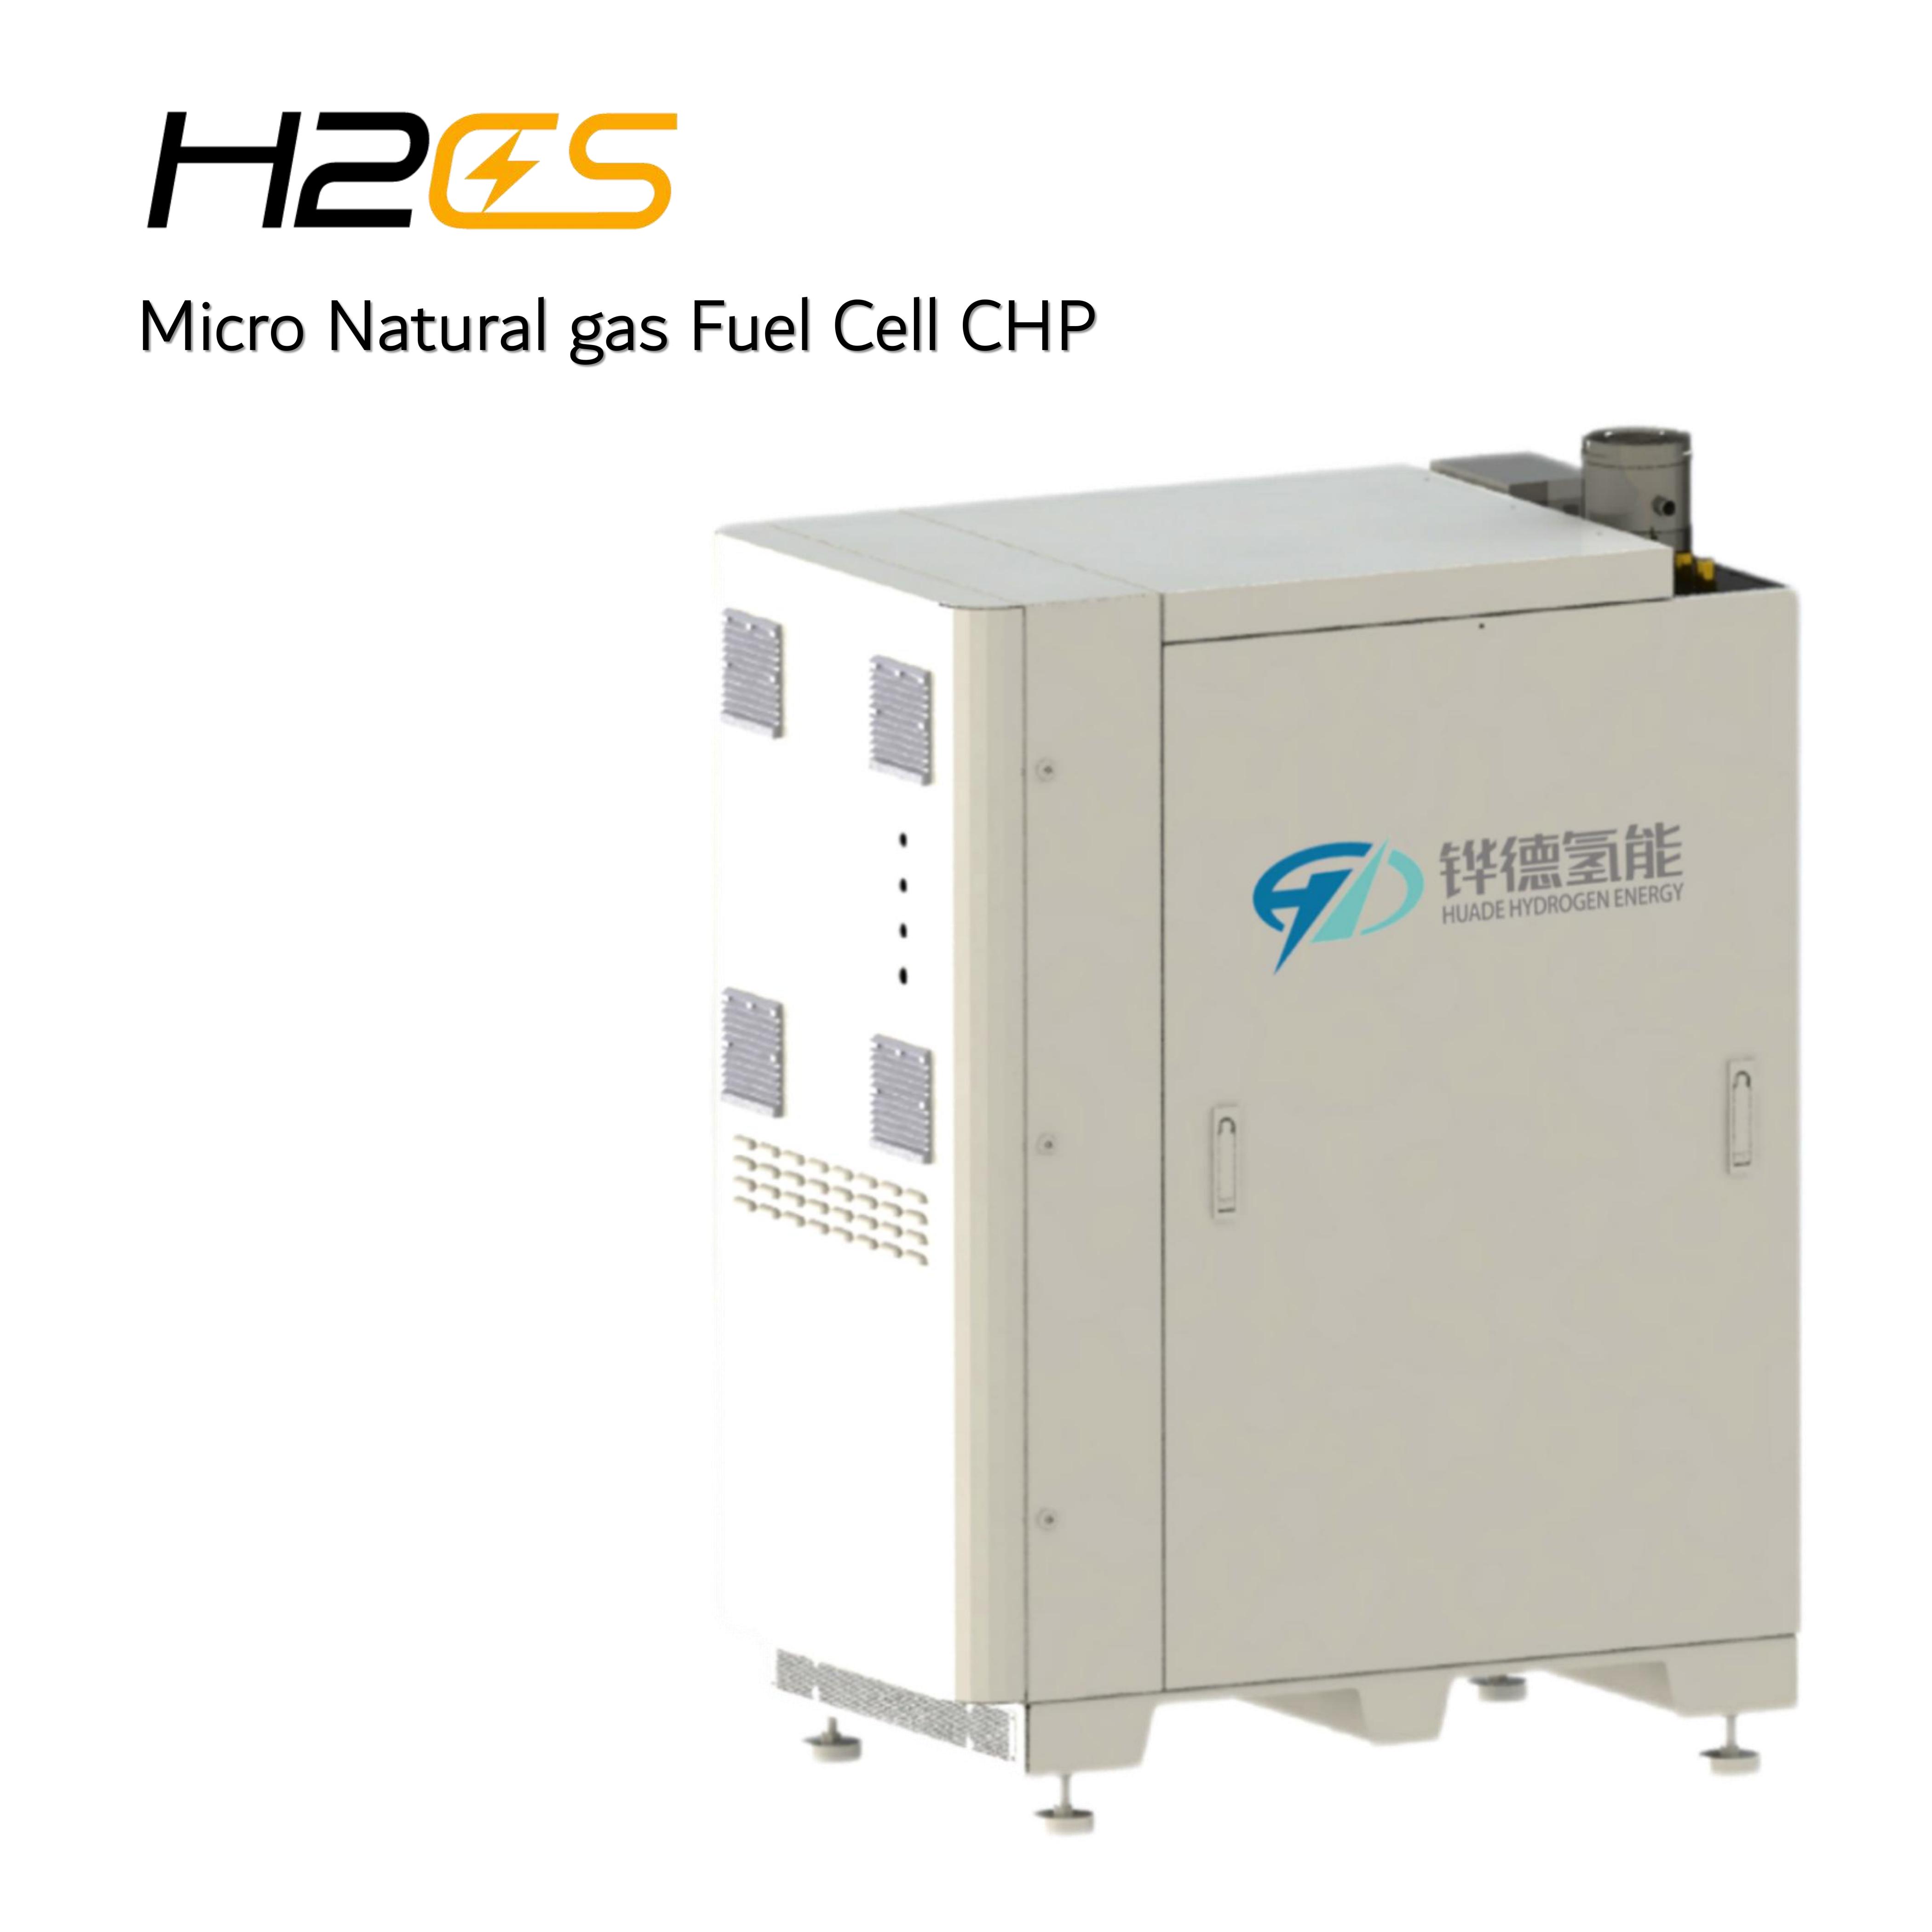 Integrated Heat Exchanger Cooling CHP System